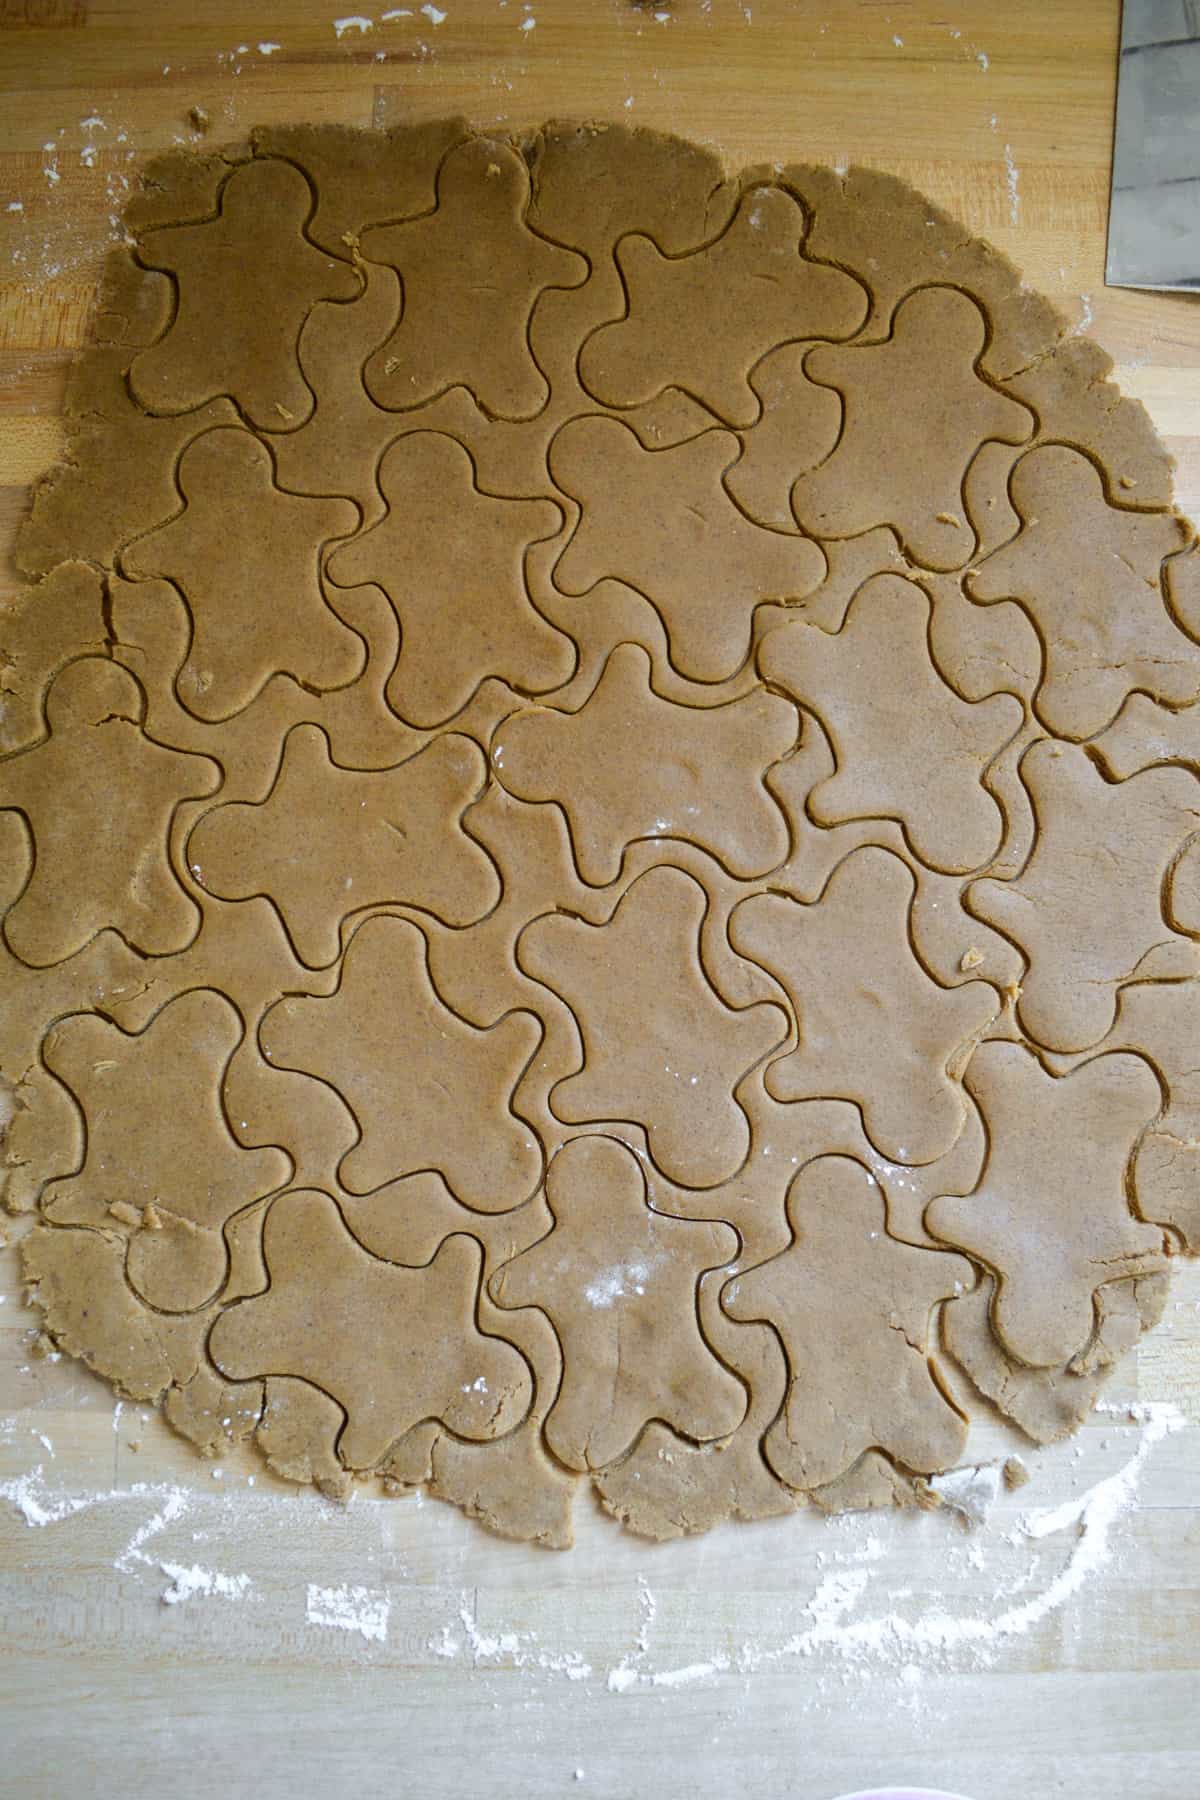 Gingerbread dough rolled out on a wooden surface with cookies cut out of it.